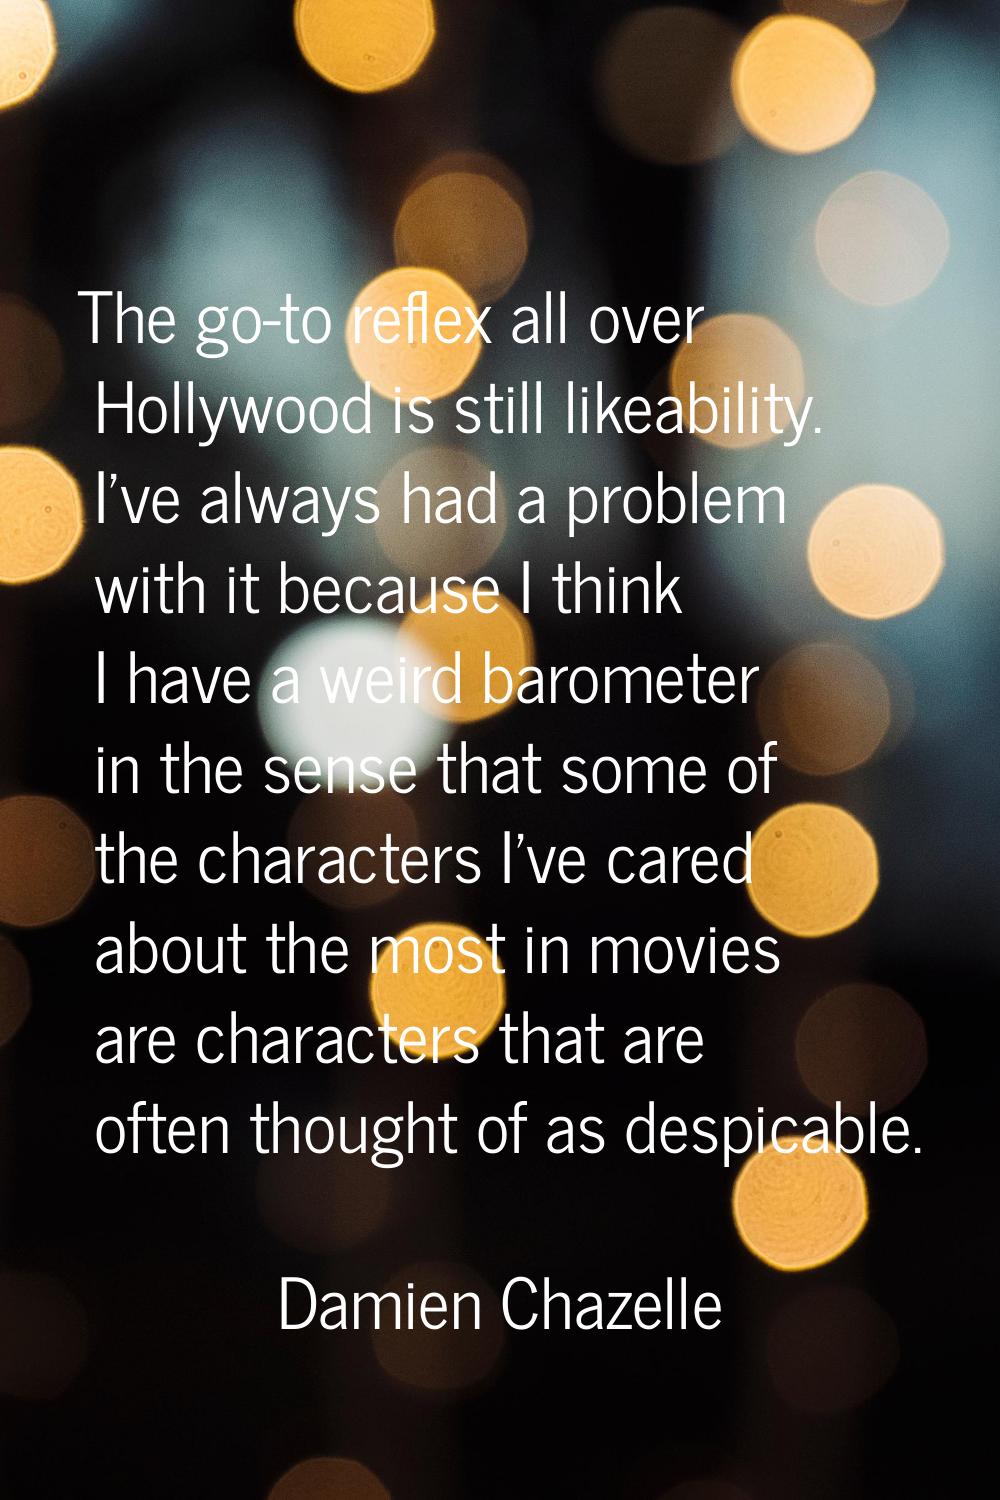 The go-to reflex all over Hollywood is still likeability. I've always had a problem with it because